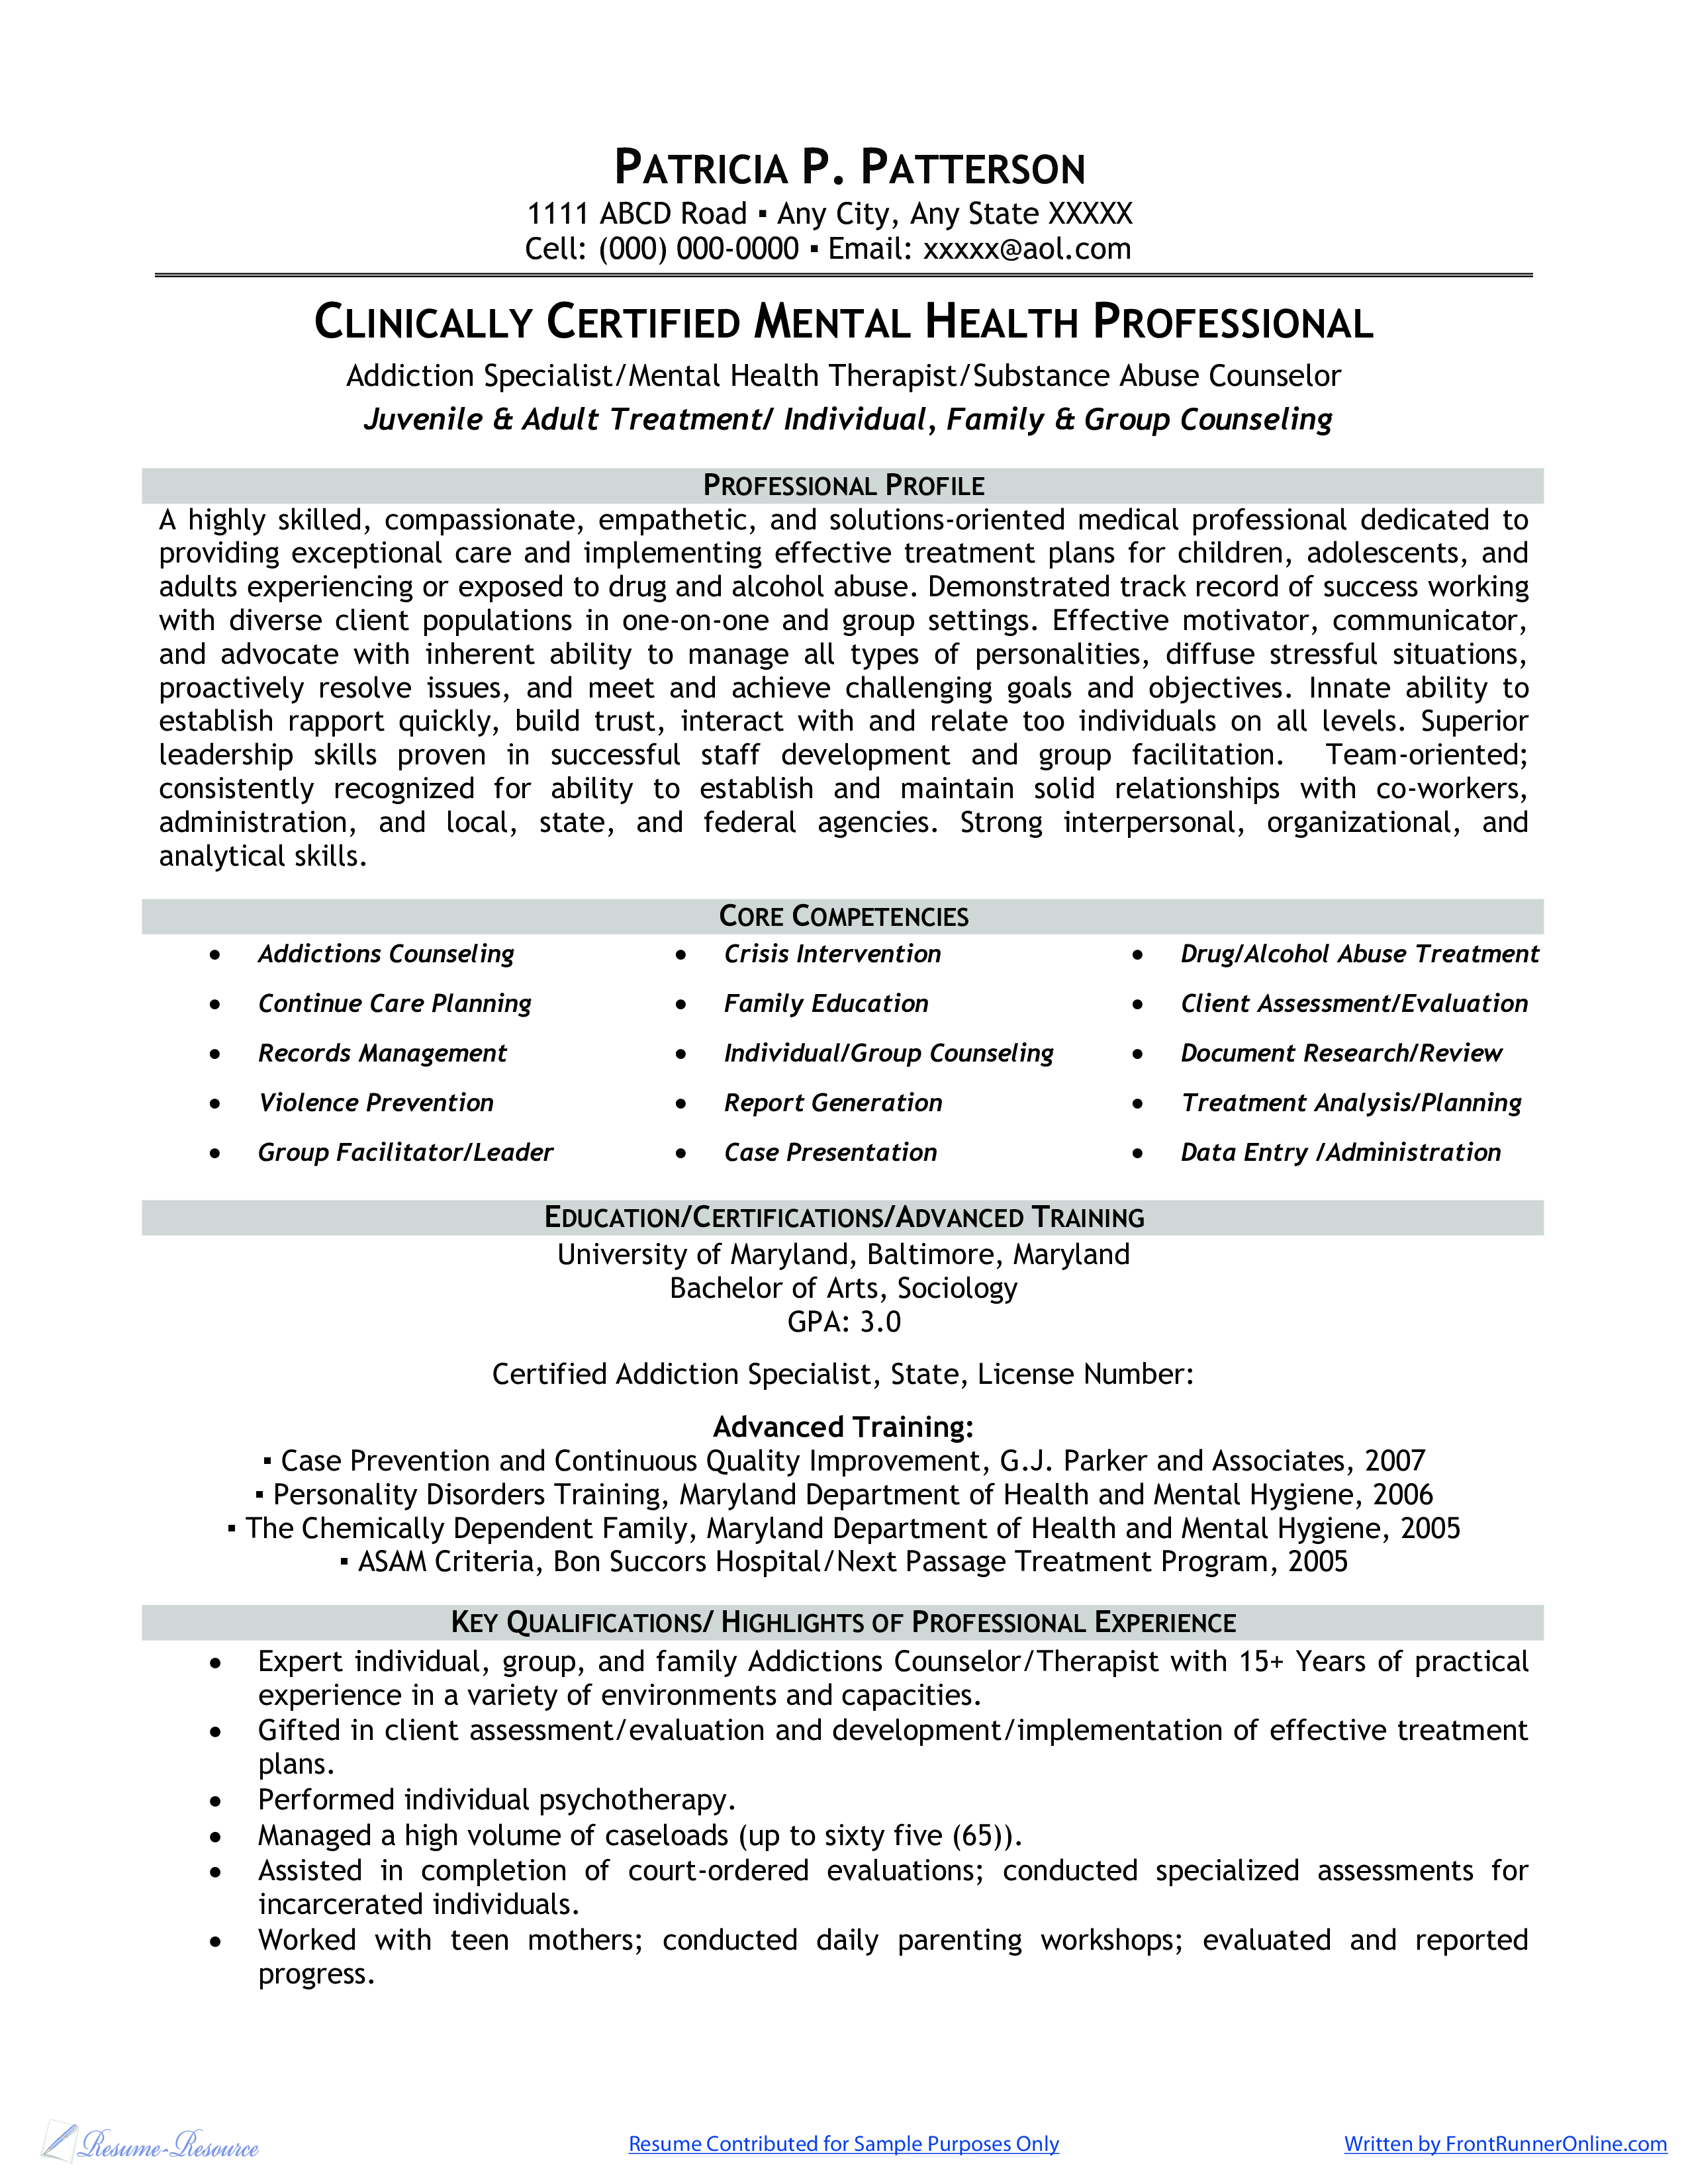 clinically certified mental health professional resume modèles